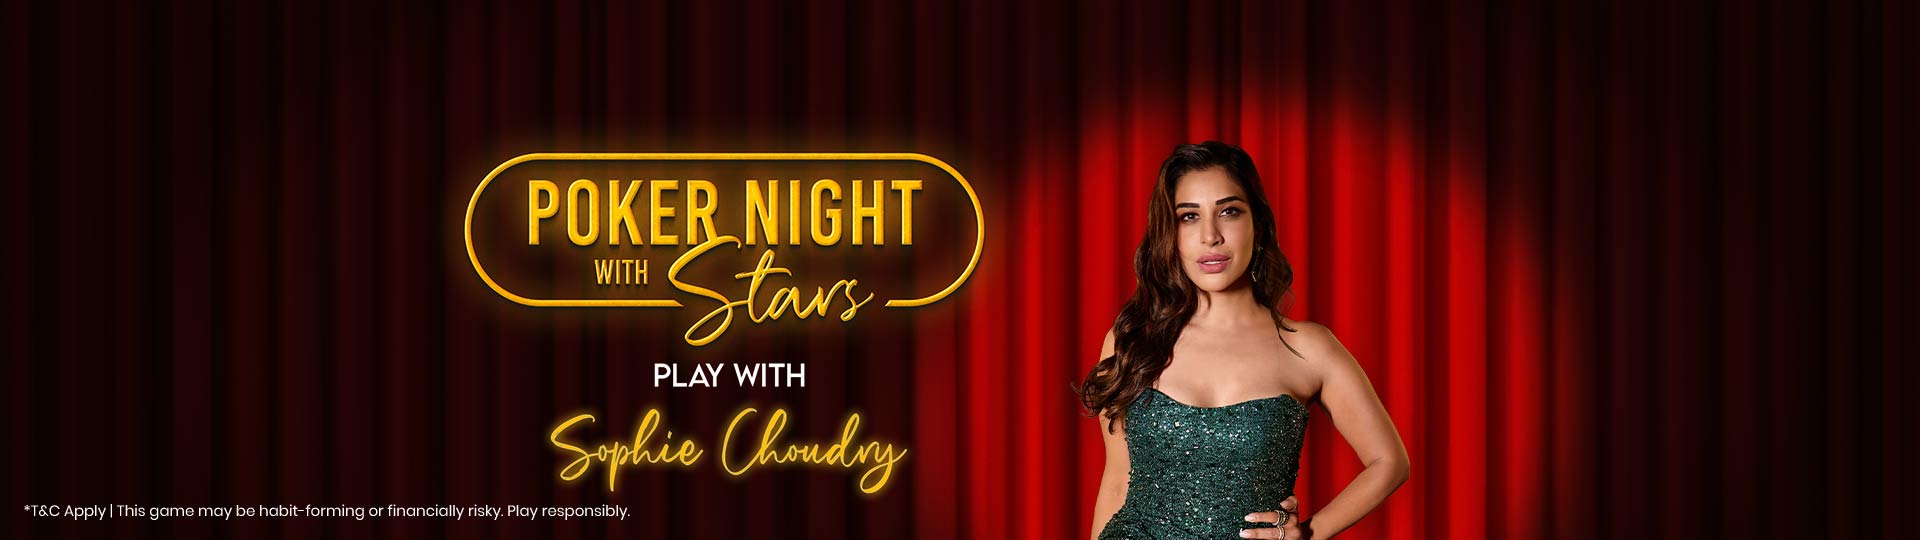 poker night with sophie choudry